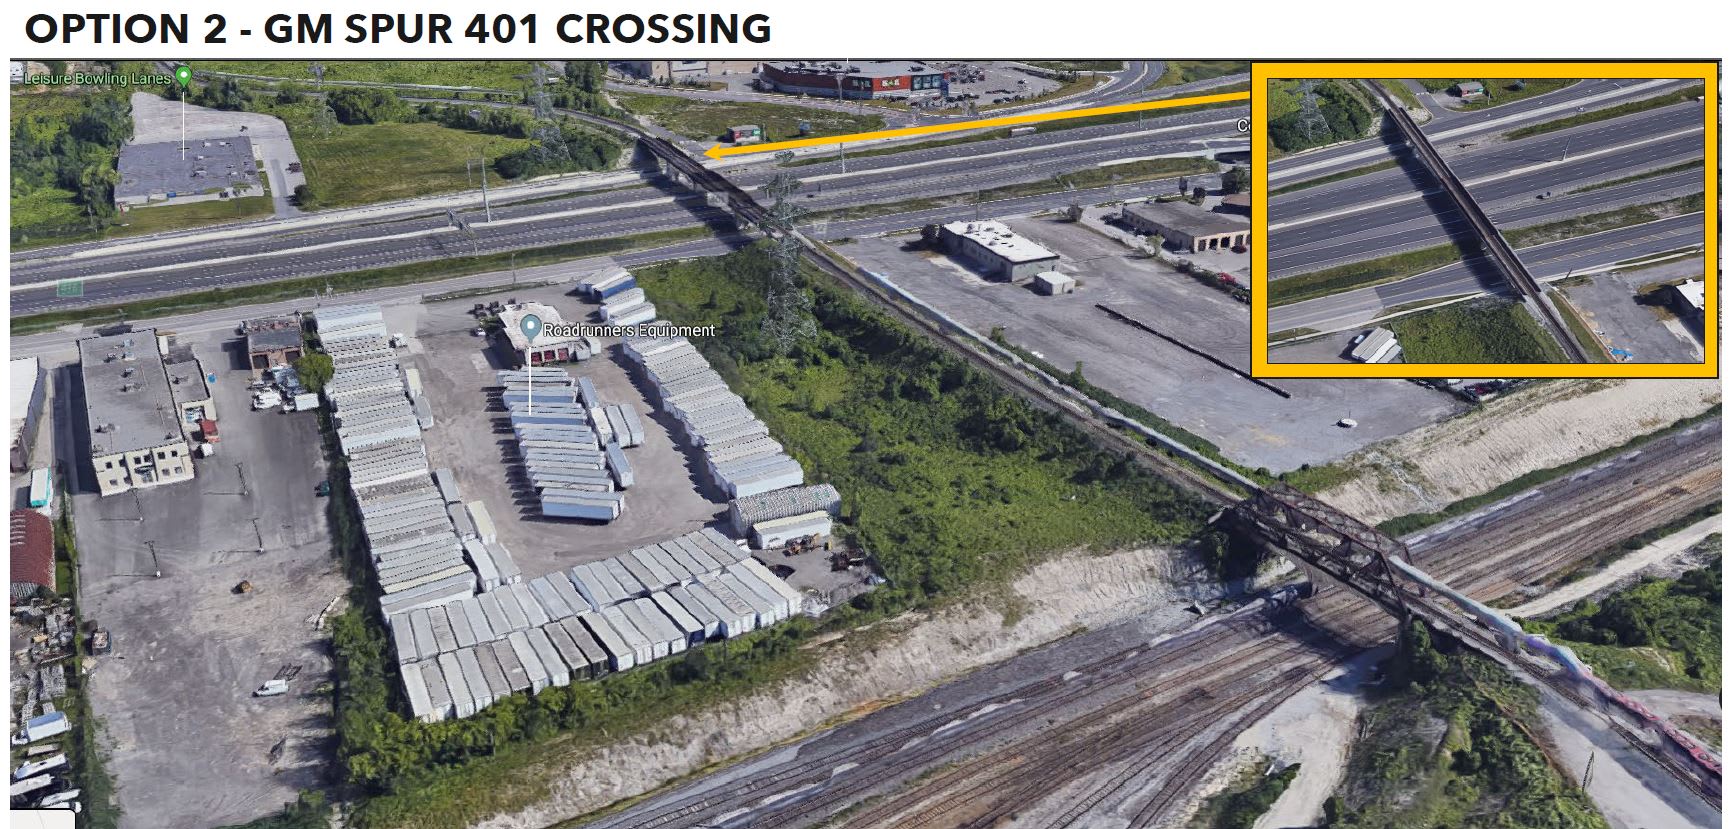 Image is a Google map showing the GM spur across Hwy. 401.